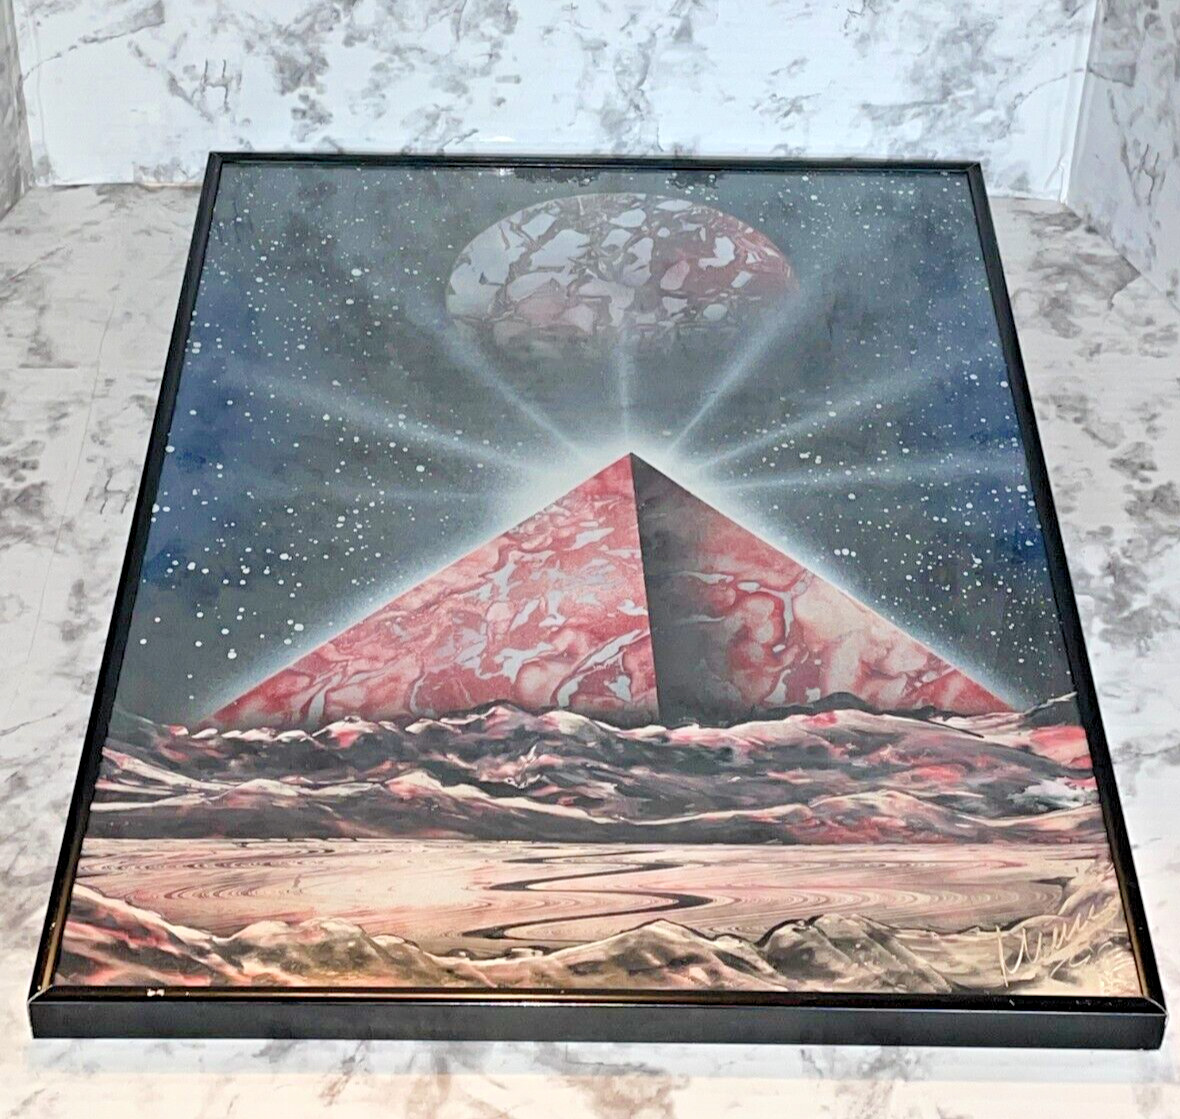 1990s Vintage Original Space Sci-Fi Spray Paint Pyramid Moon Framed and Signed